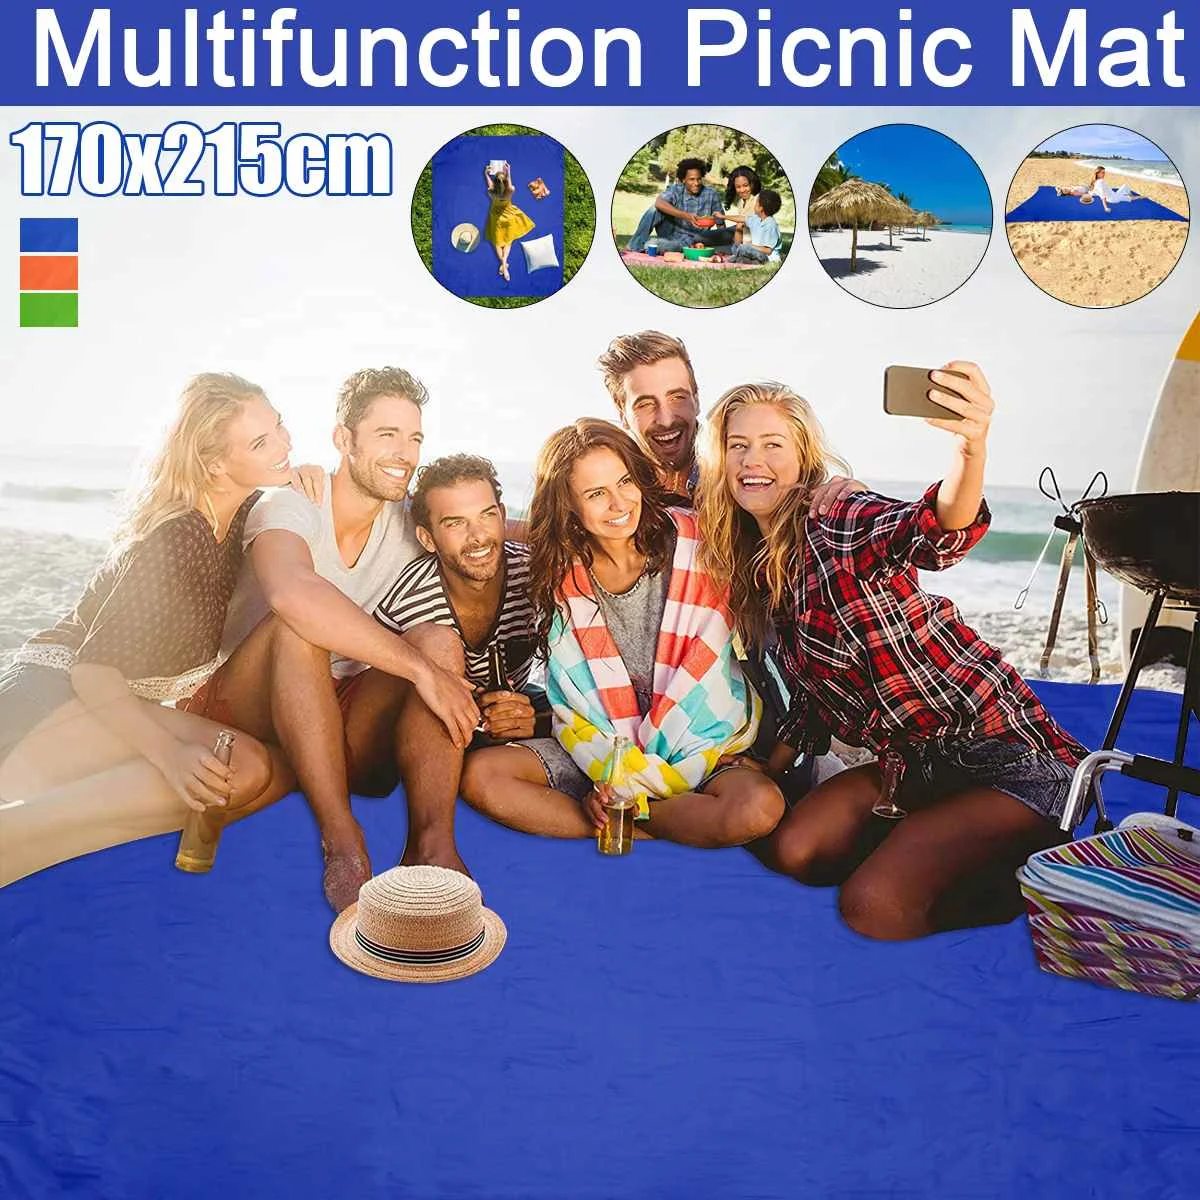 

2150x1700mm Portable Pocket Picnic Mat Waterproof Sand Beach Mat Outdoor Camping Folding Blanket Picknick Tent Cover Bedding Bed